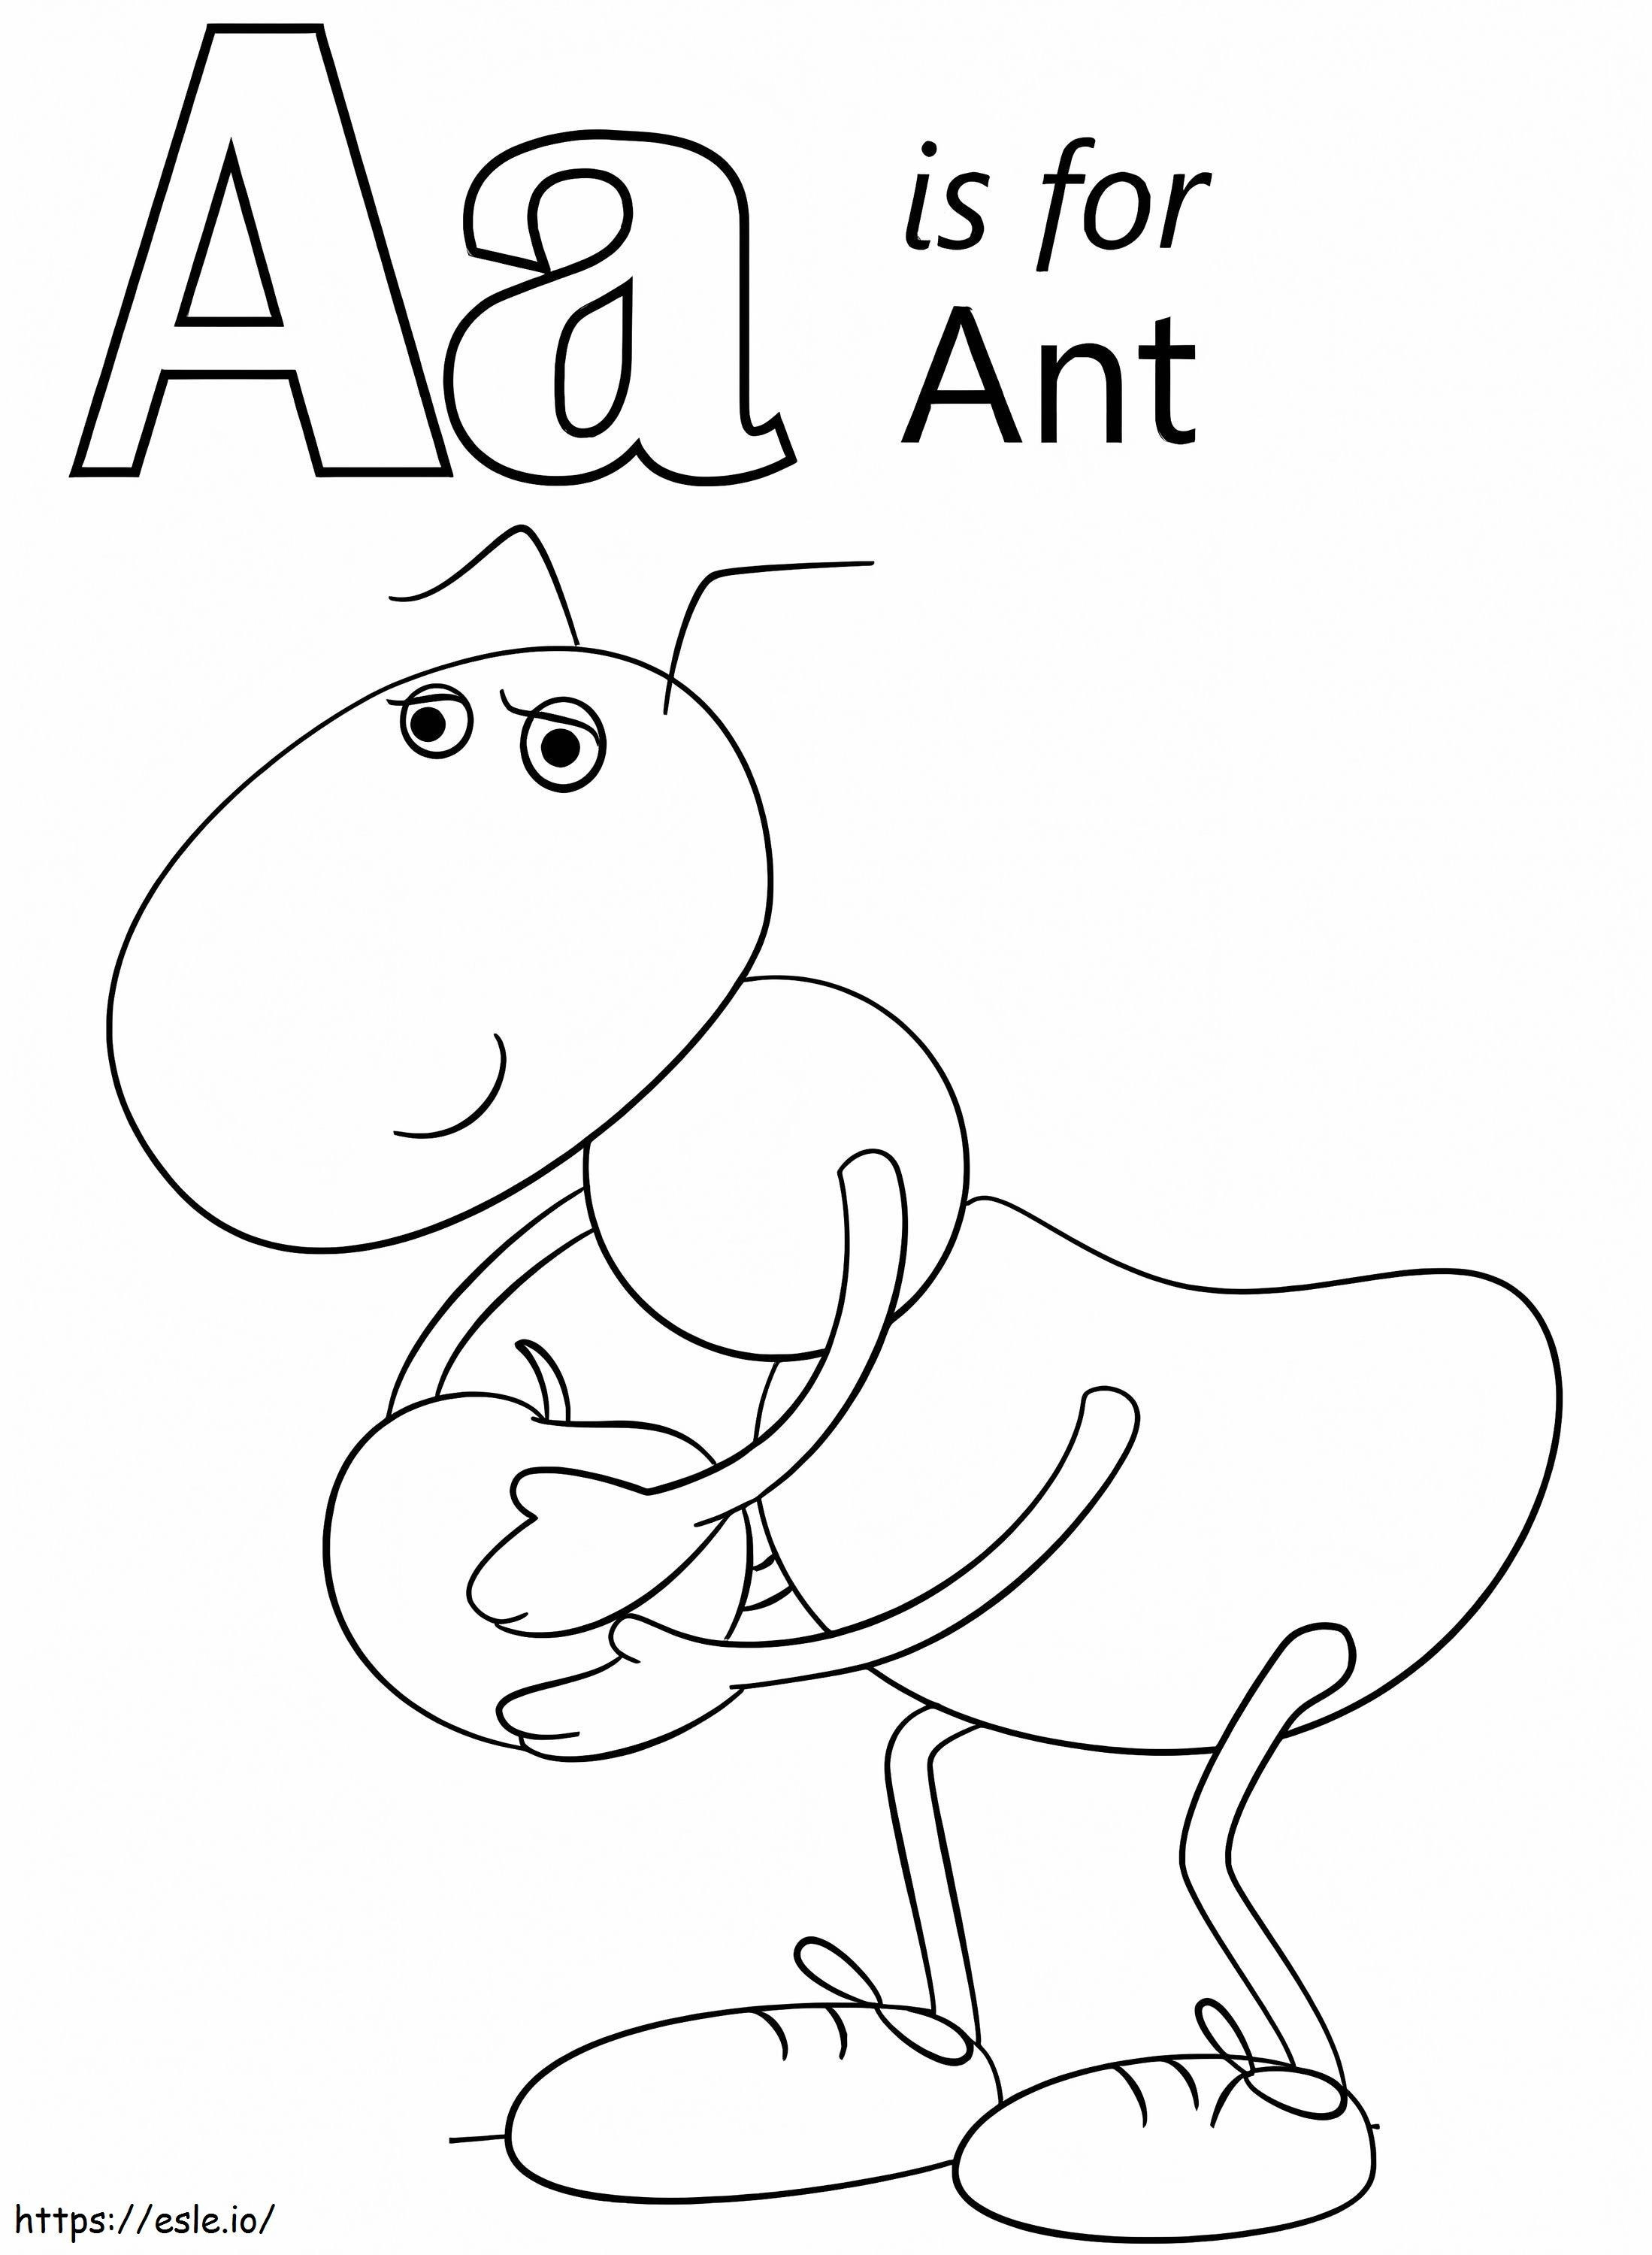 Ant Letter A coloring page